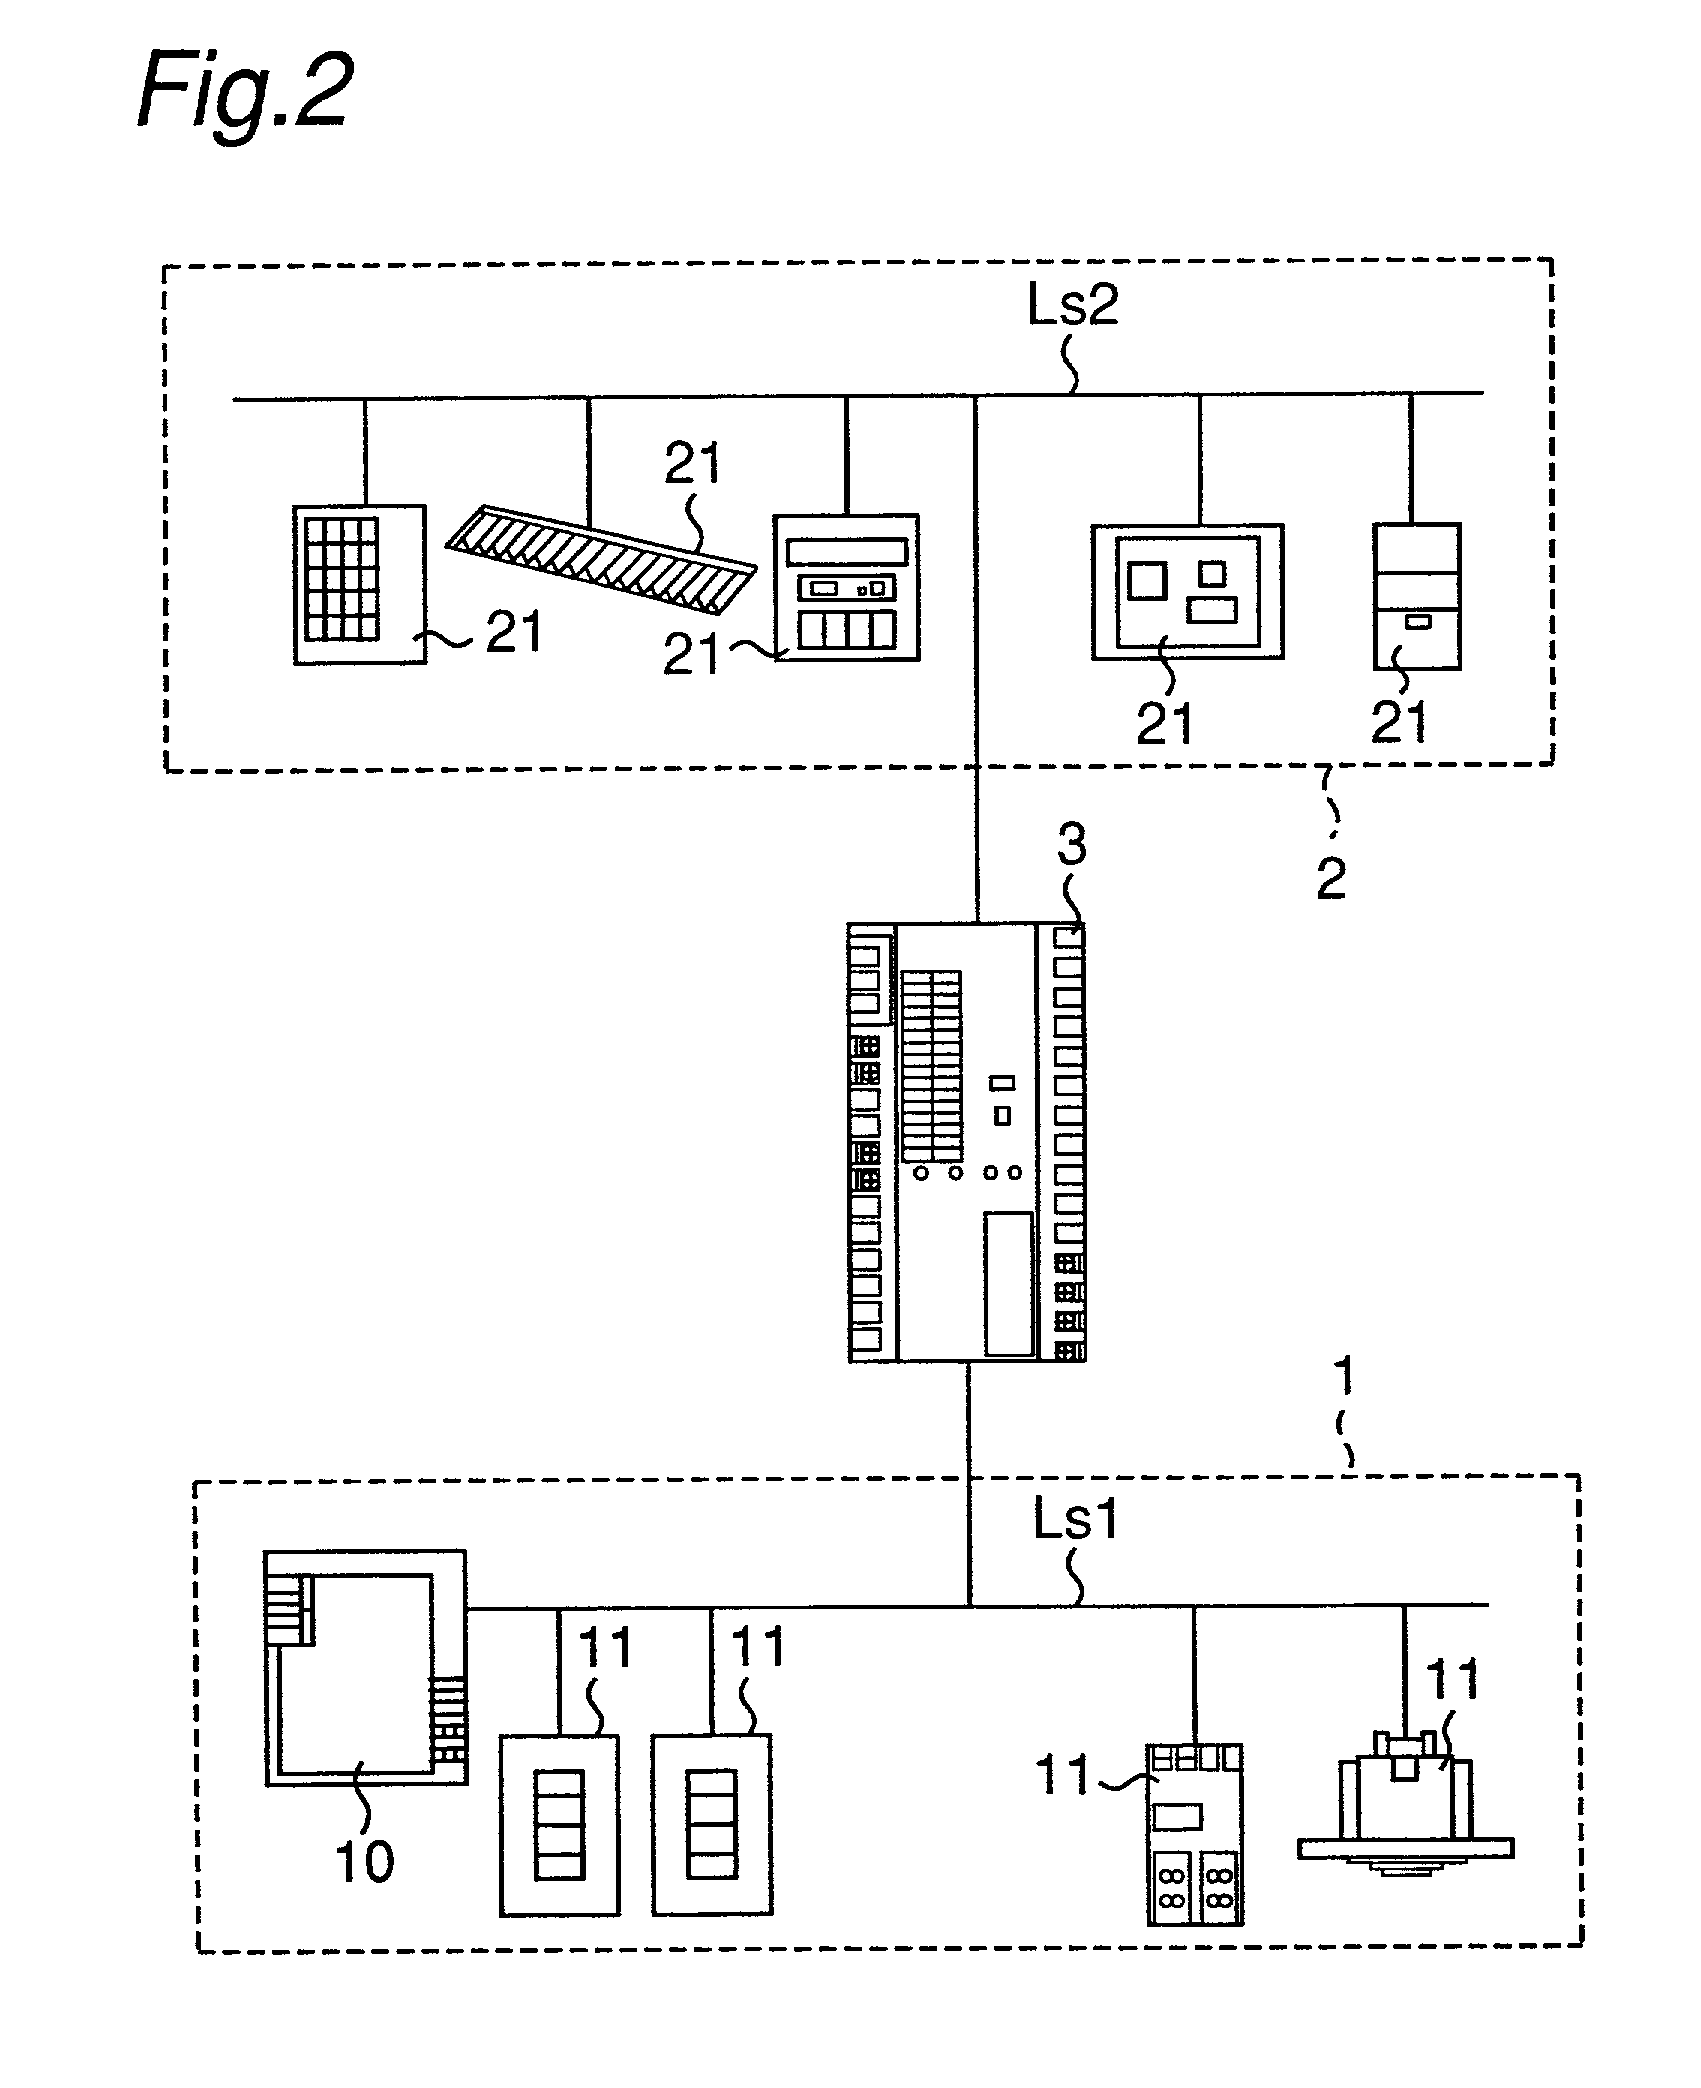 Interface apparatus provided between two remote control systems having different transmission modes